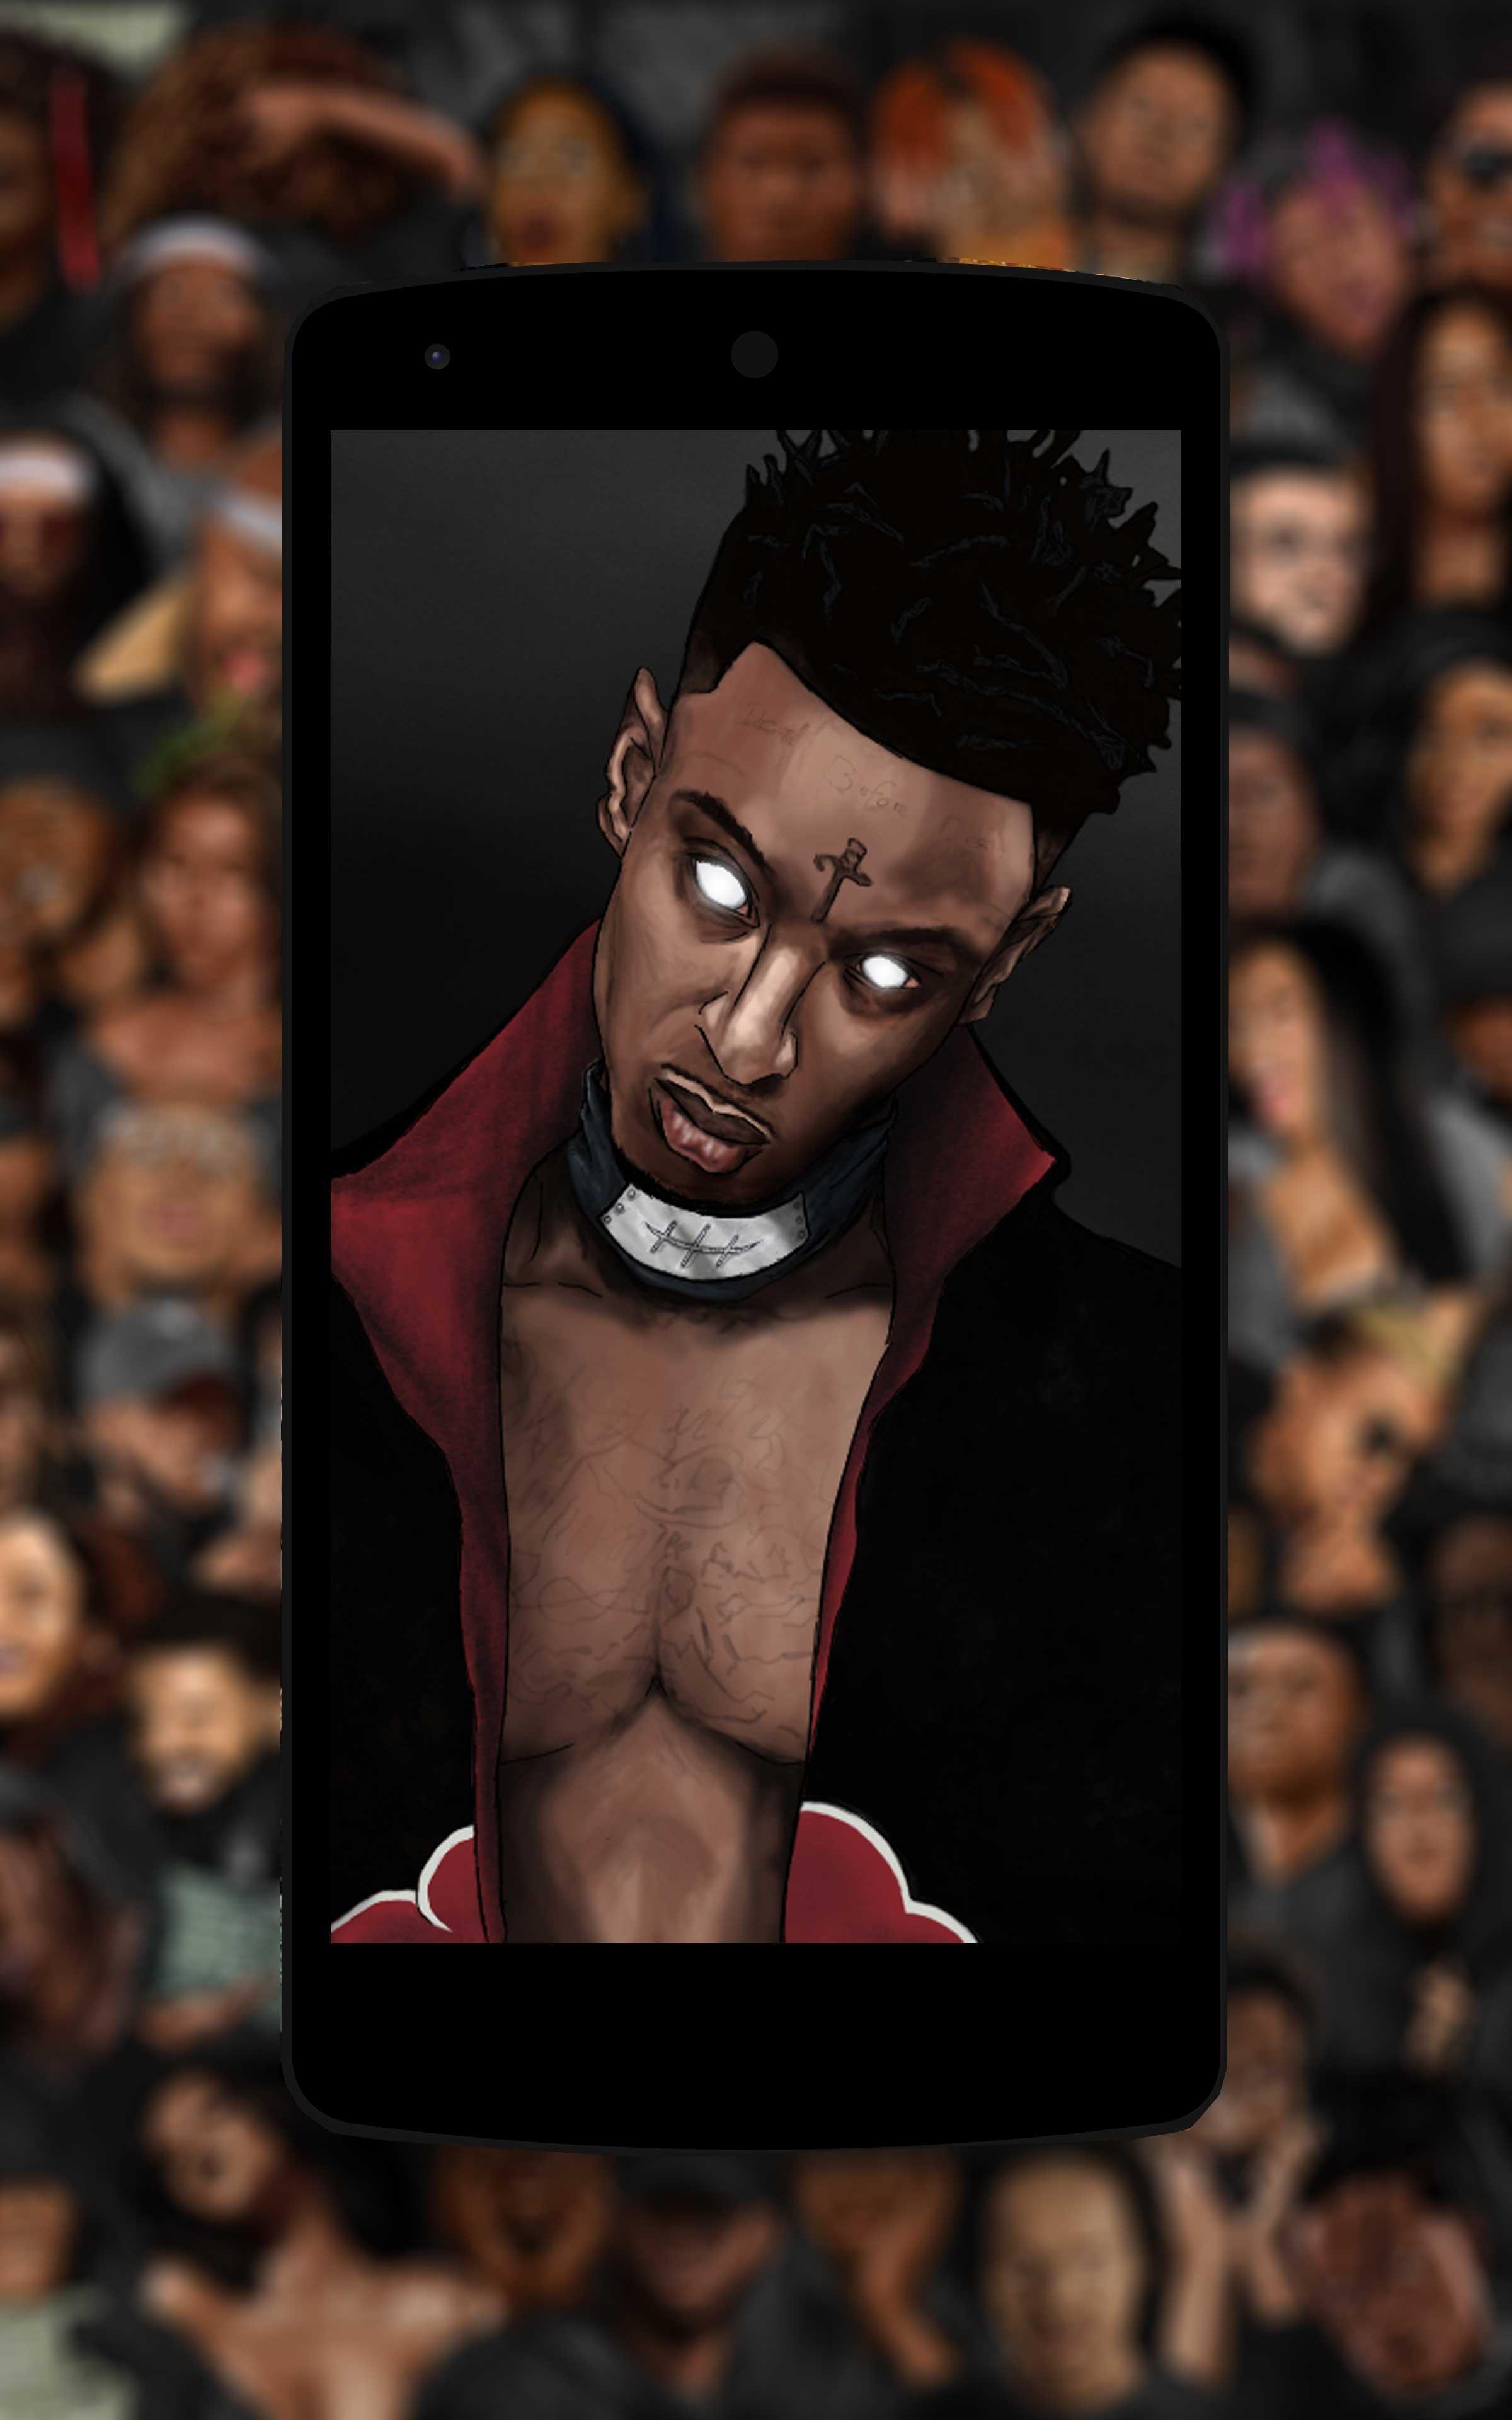 Fire 21 Savage Wallpaper Made By @tylerissoepic On Instagram 🔥 : r/21savage